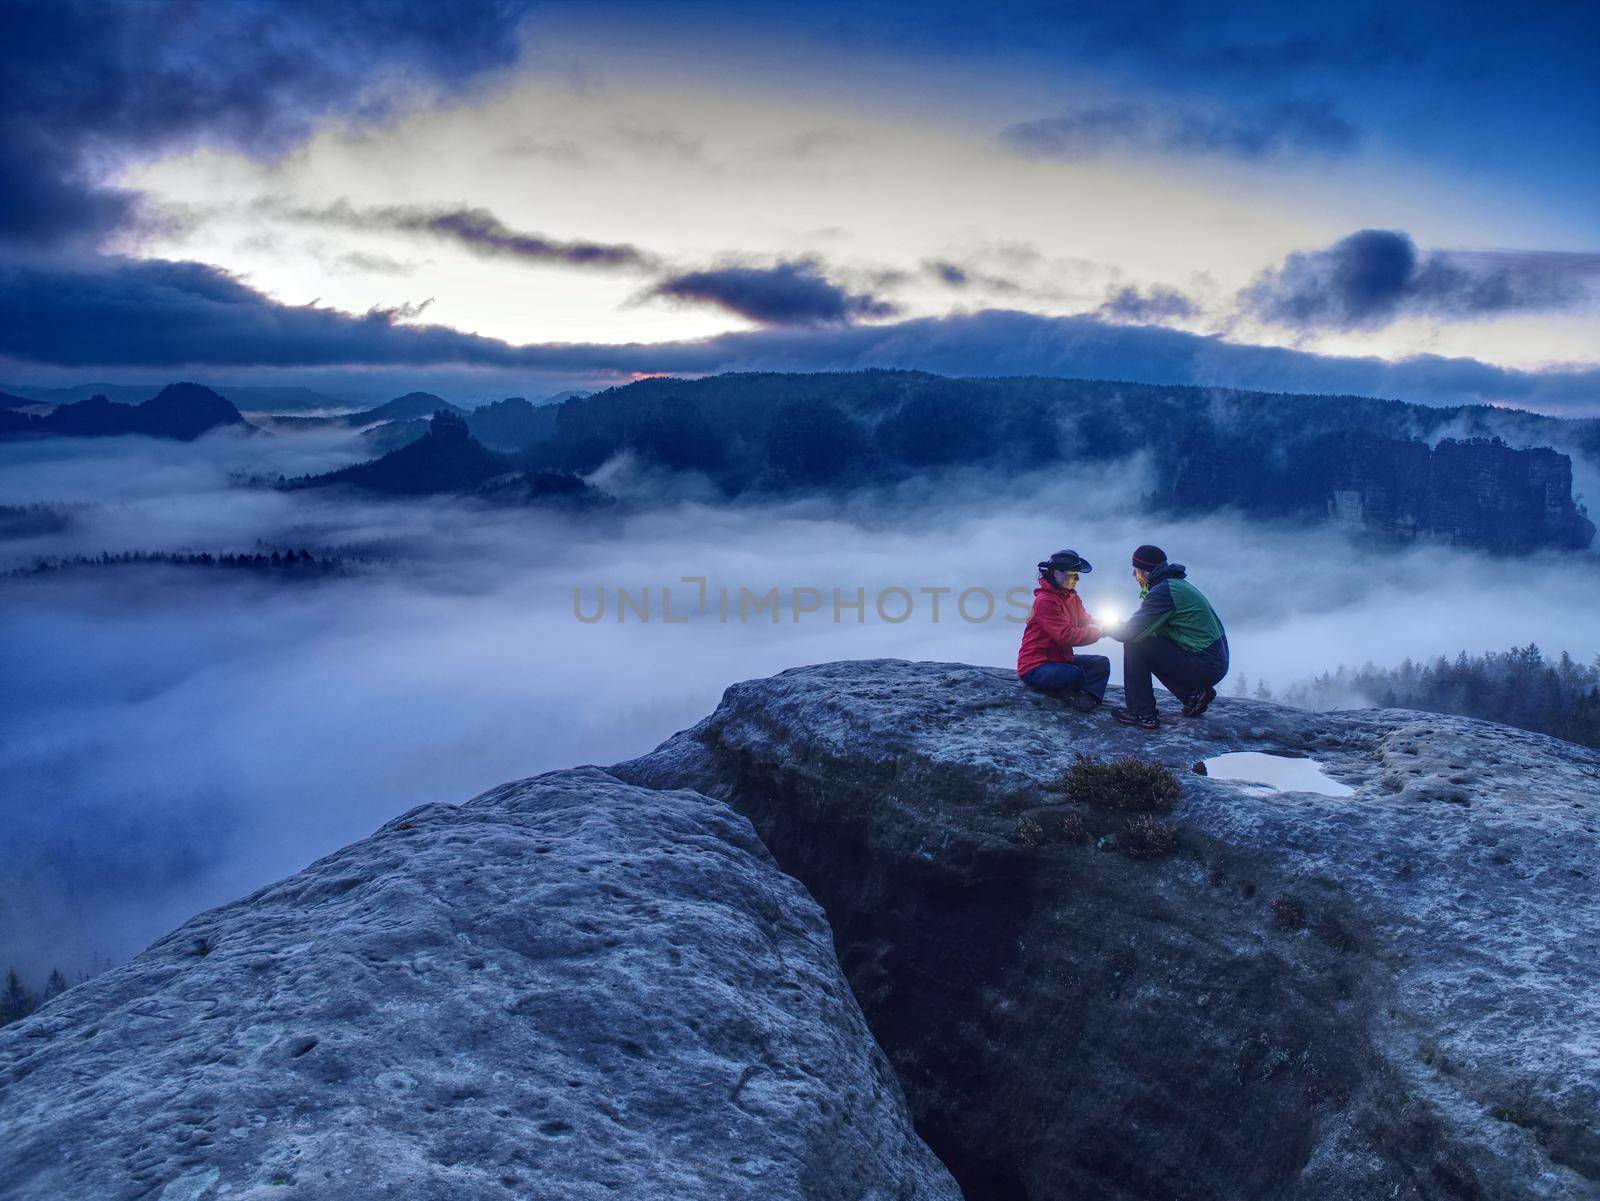 Hikers or climbers in mountains. Couple hold the light  high above danger gulch between rocks. Night photo in misty mountains. Lovers standing on rocky mountain peak